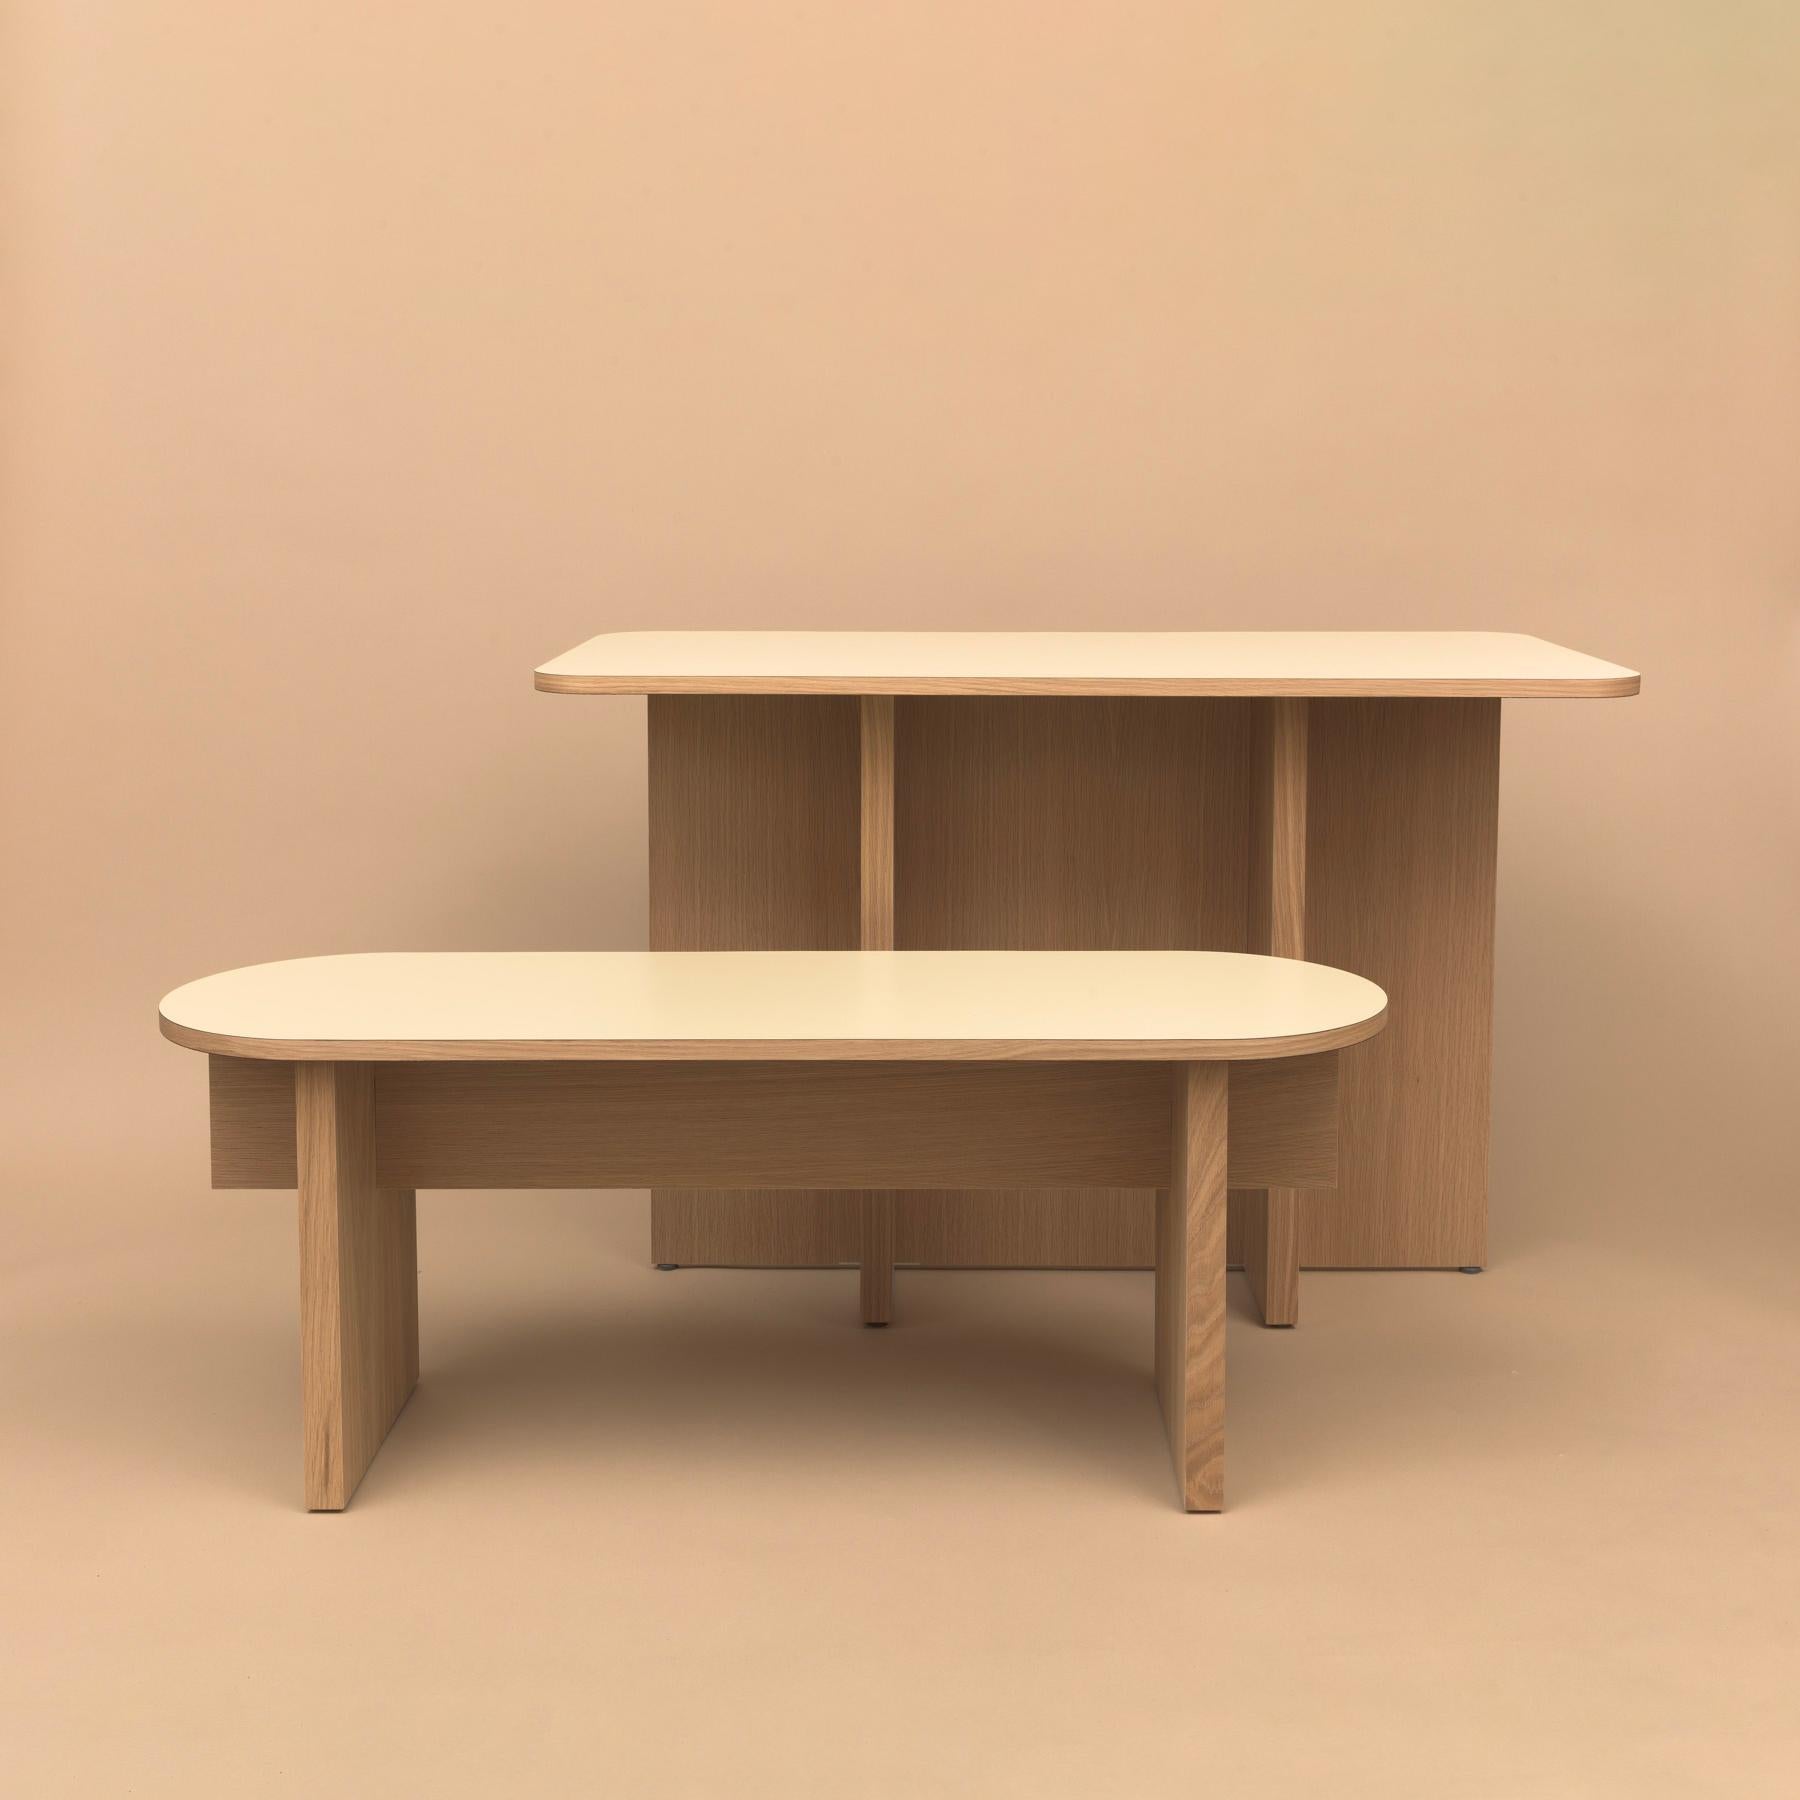 American T-Top Bench or Coffee Table in Oak Veneered Plywood and Colorful Laminate